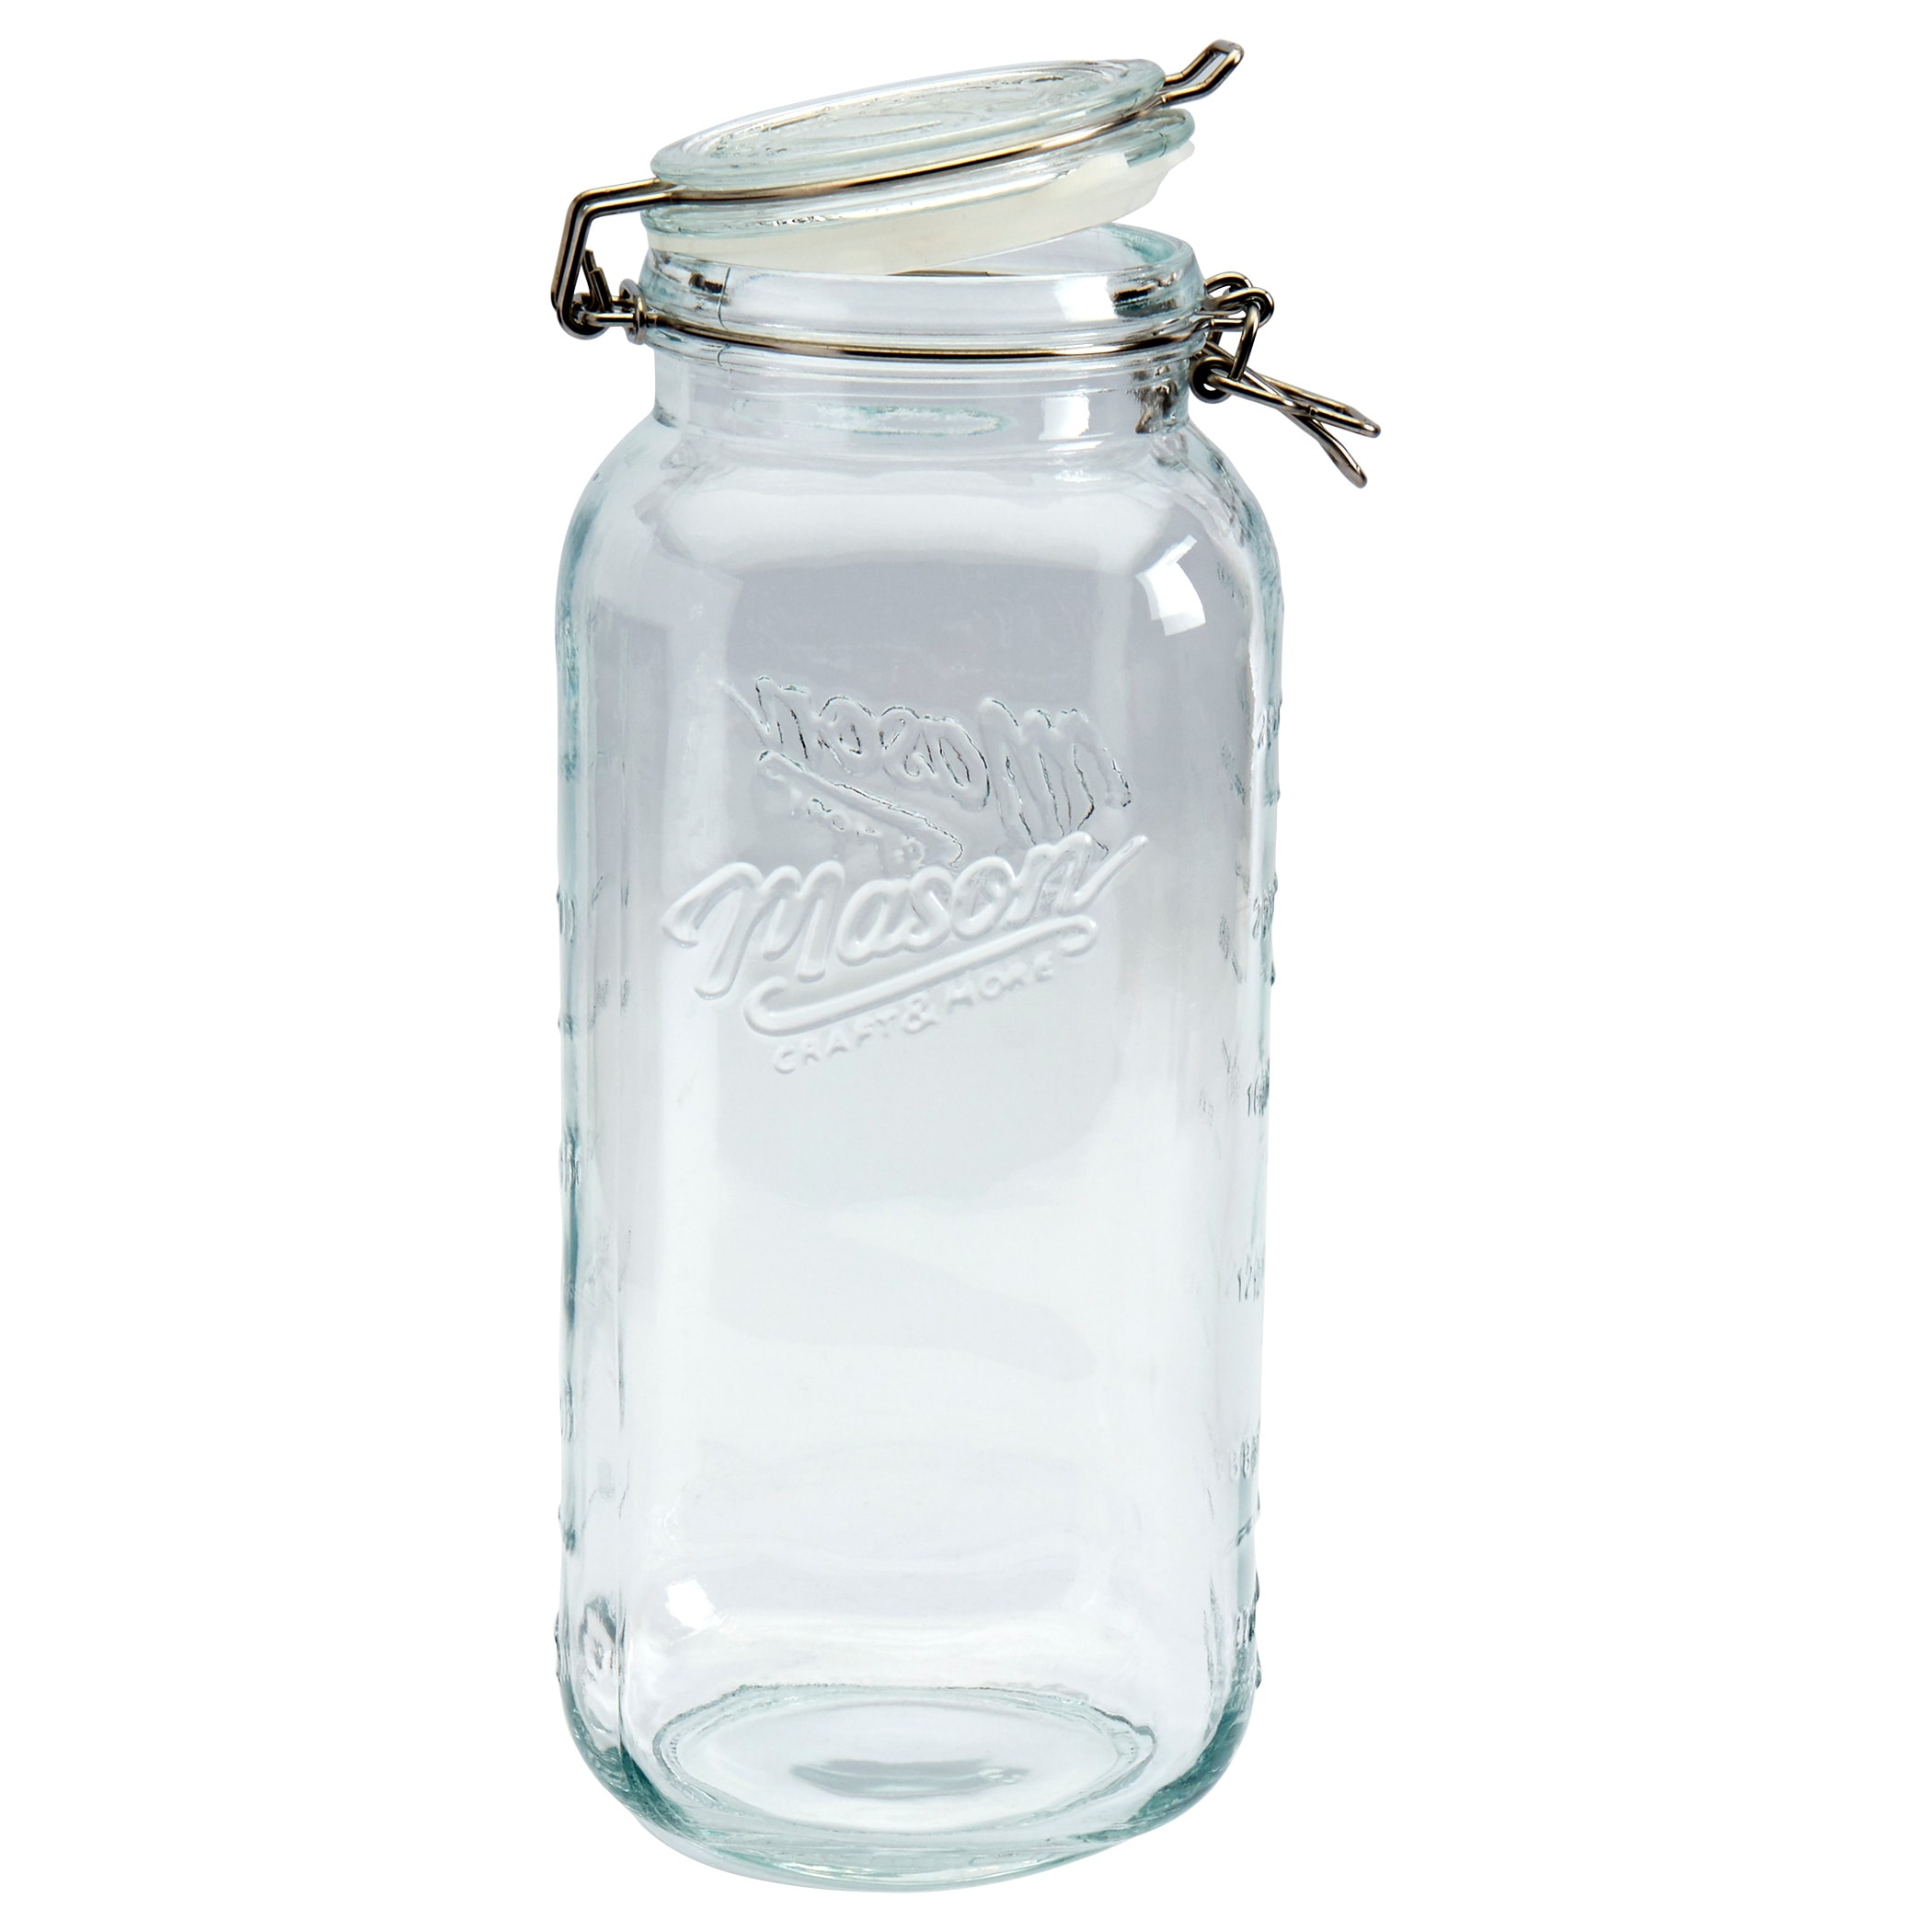 https://ak1.ostkcdn.com/images/products/is/images/direct/115f8c94eaff0ae8de1f4bc3a0e49853a8251a77/Mason-Craft-%26-More-3L-Preservative-Jar-with-Lid.jpg